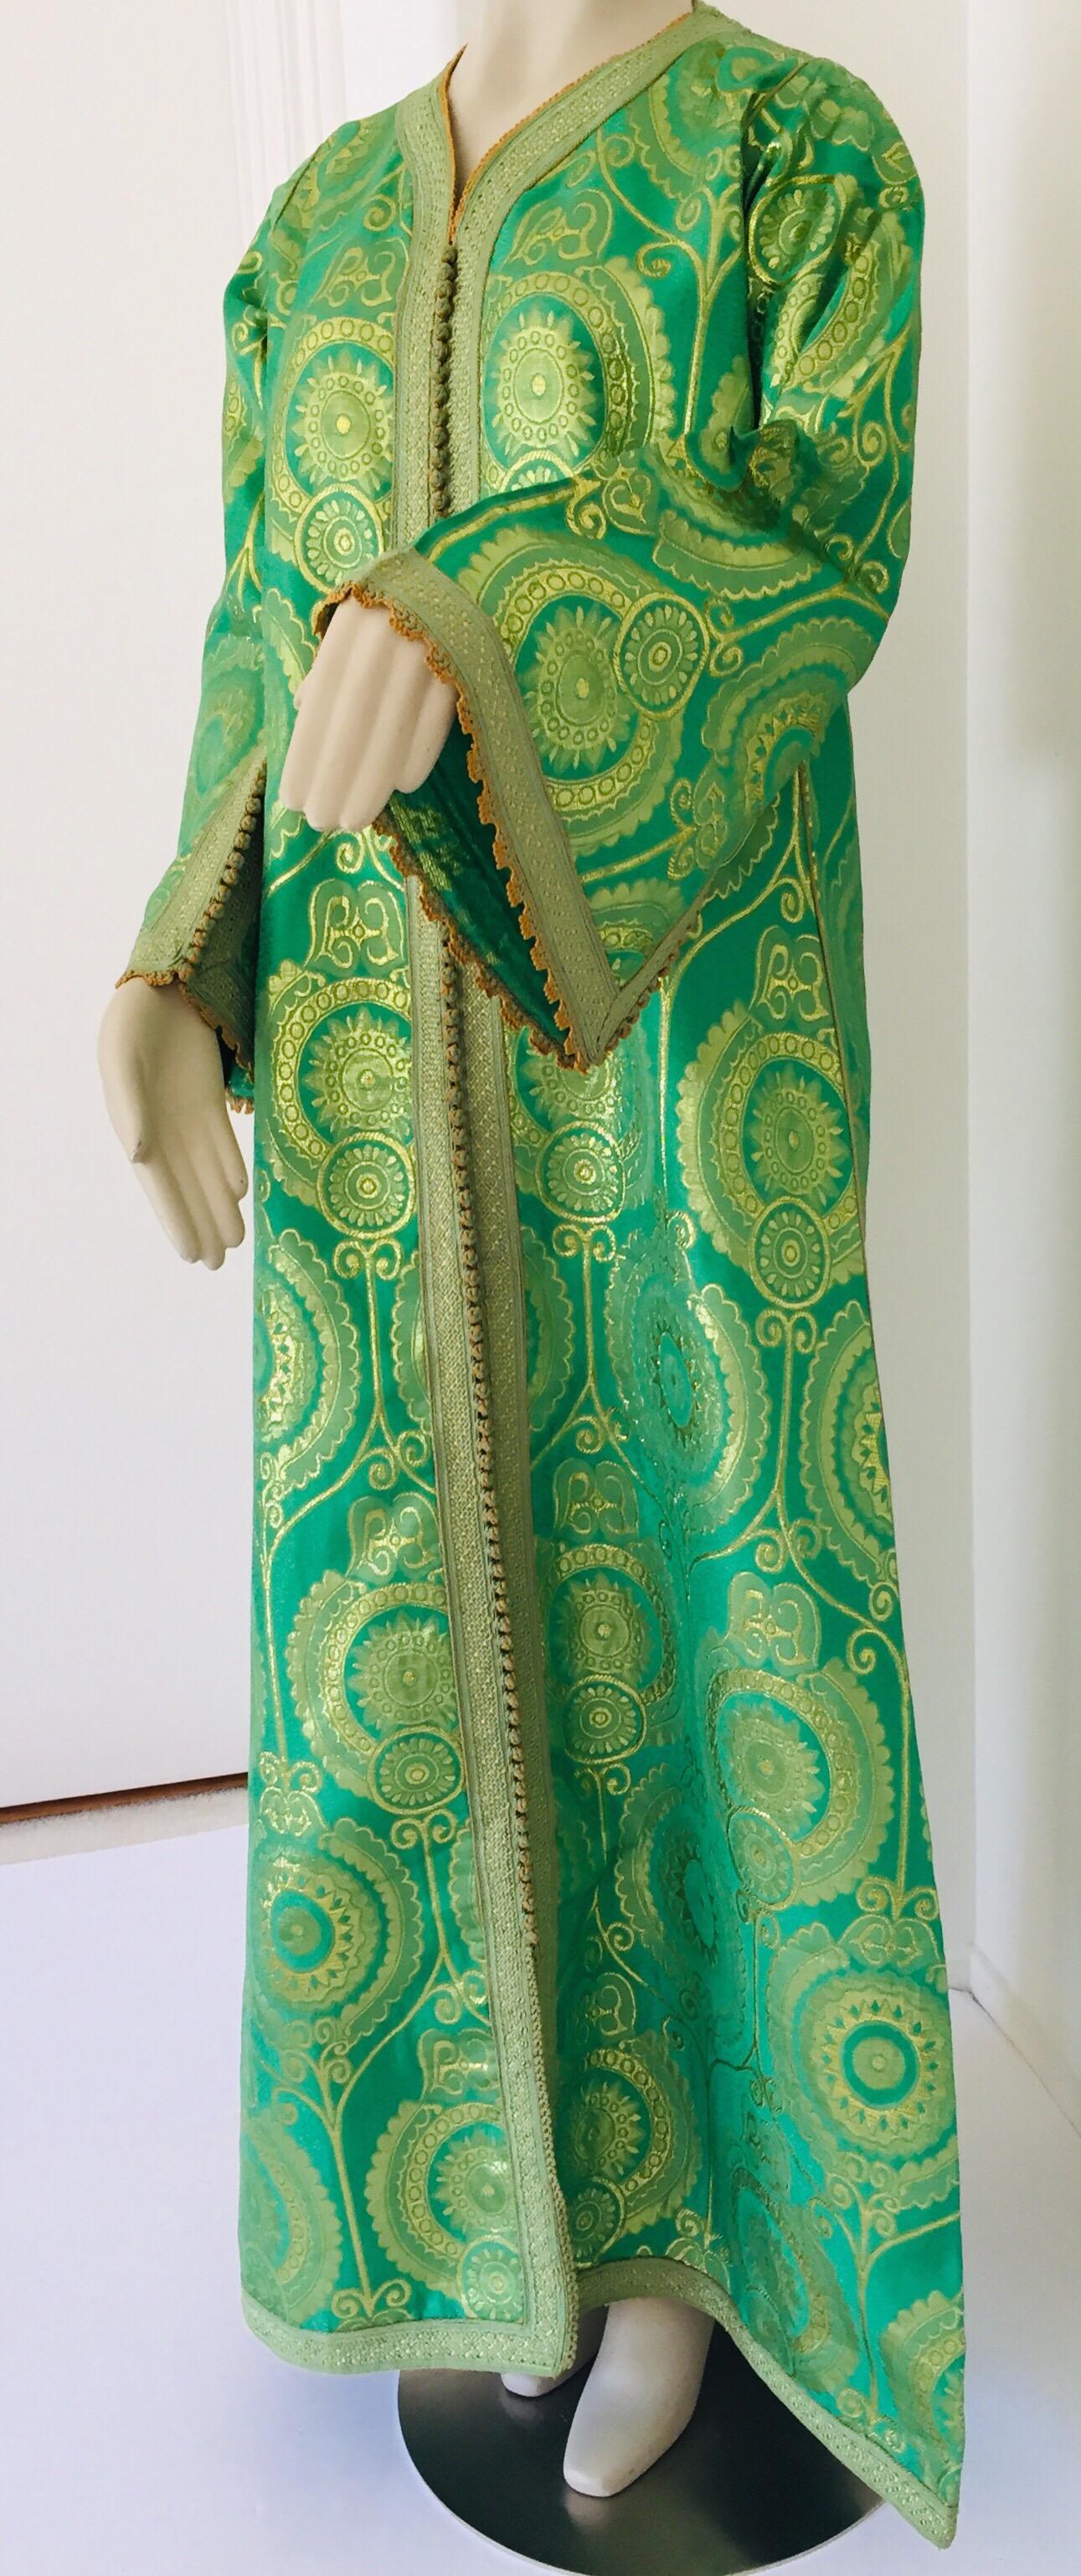 20th Century Elegant Moroccan Caftan Lime Green and Gold Metallic Floral Brocade